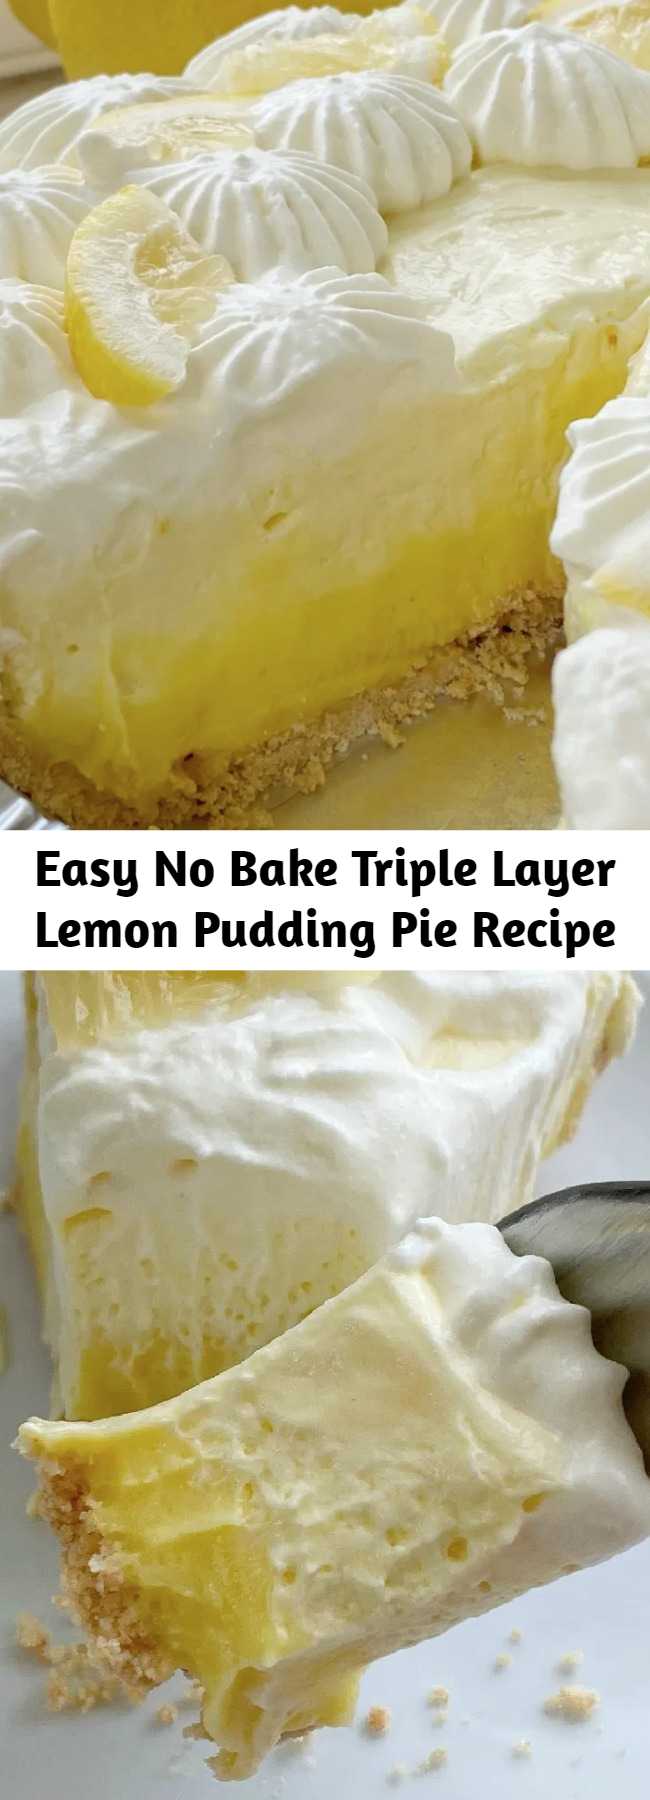 Easy No Bake Triple Layer Lemon Pudding Pie Recipe - This easy & simple no bake triple layer lemon pudding pie is the perfect summertime dessert! You only need 5 ingredients for a sweet and creamy lemon pudding pie that is no bake and so simple to make.